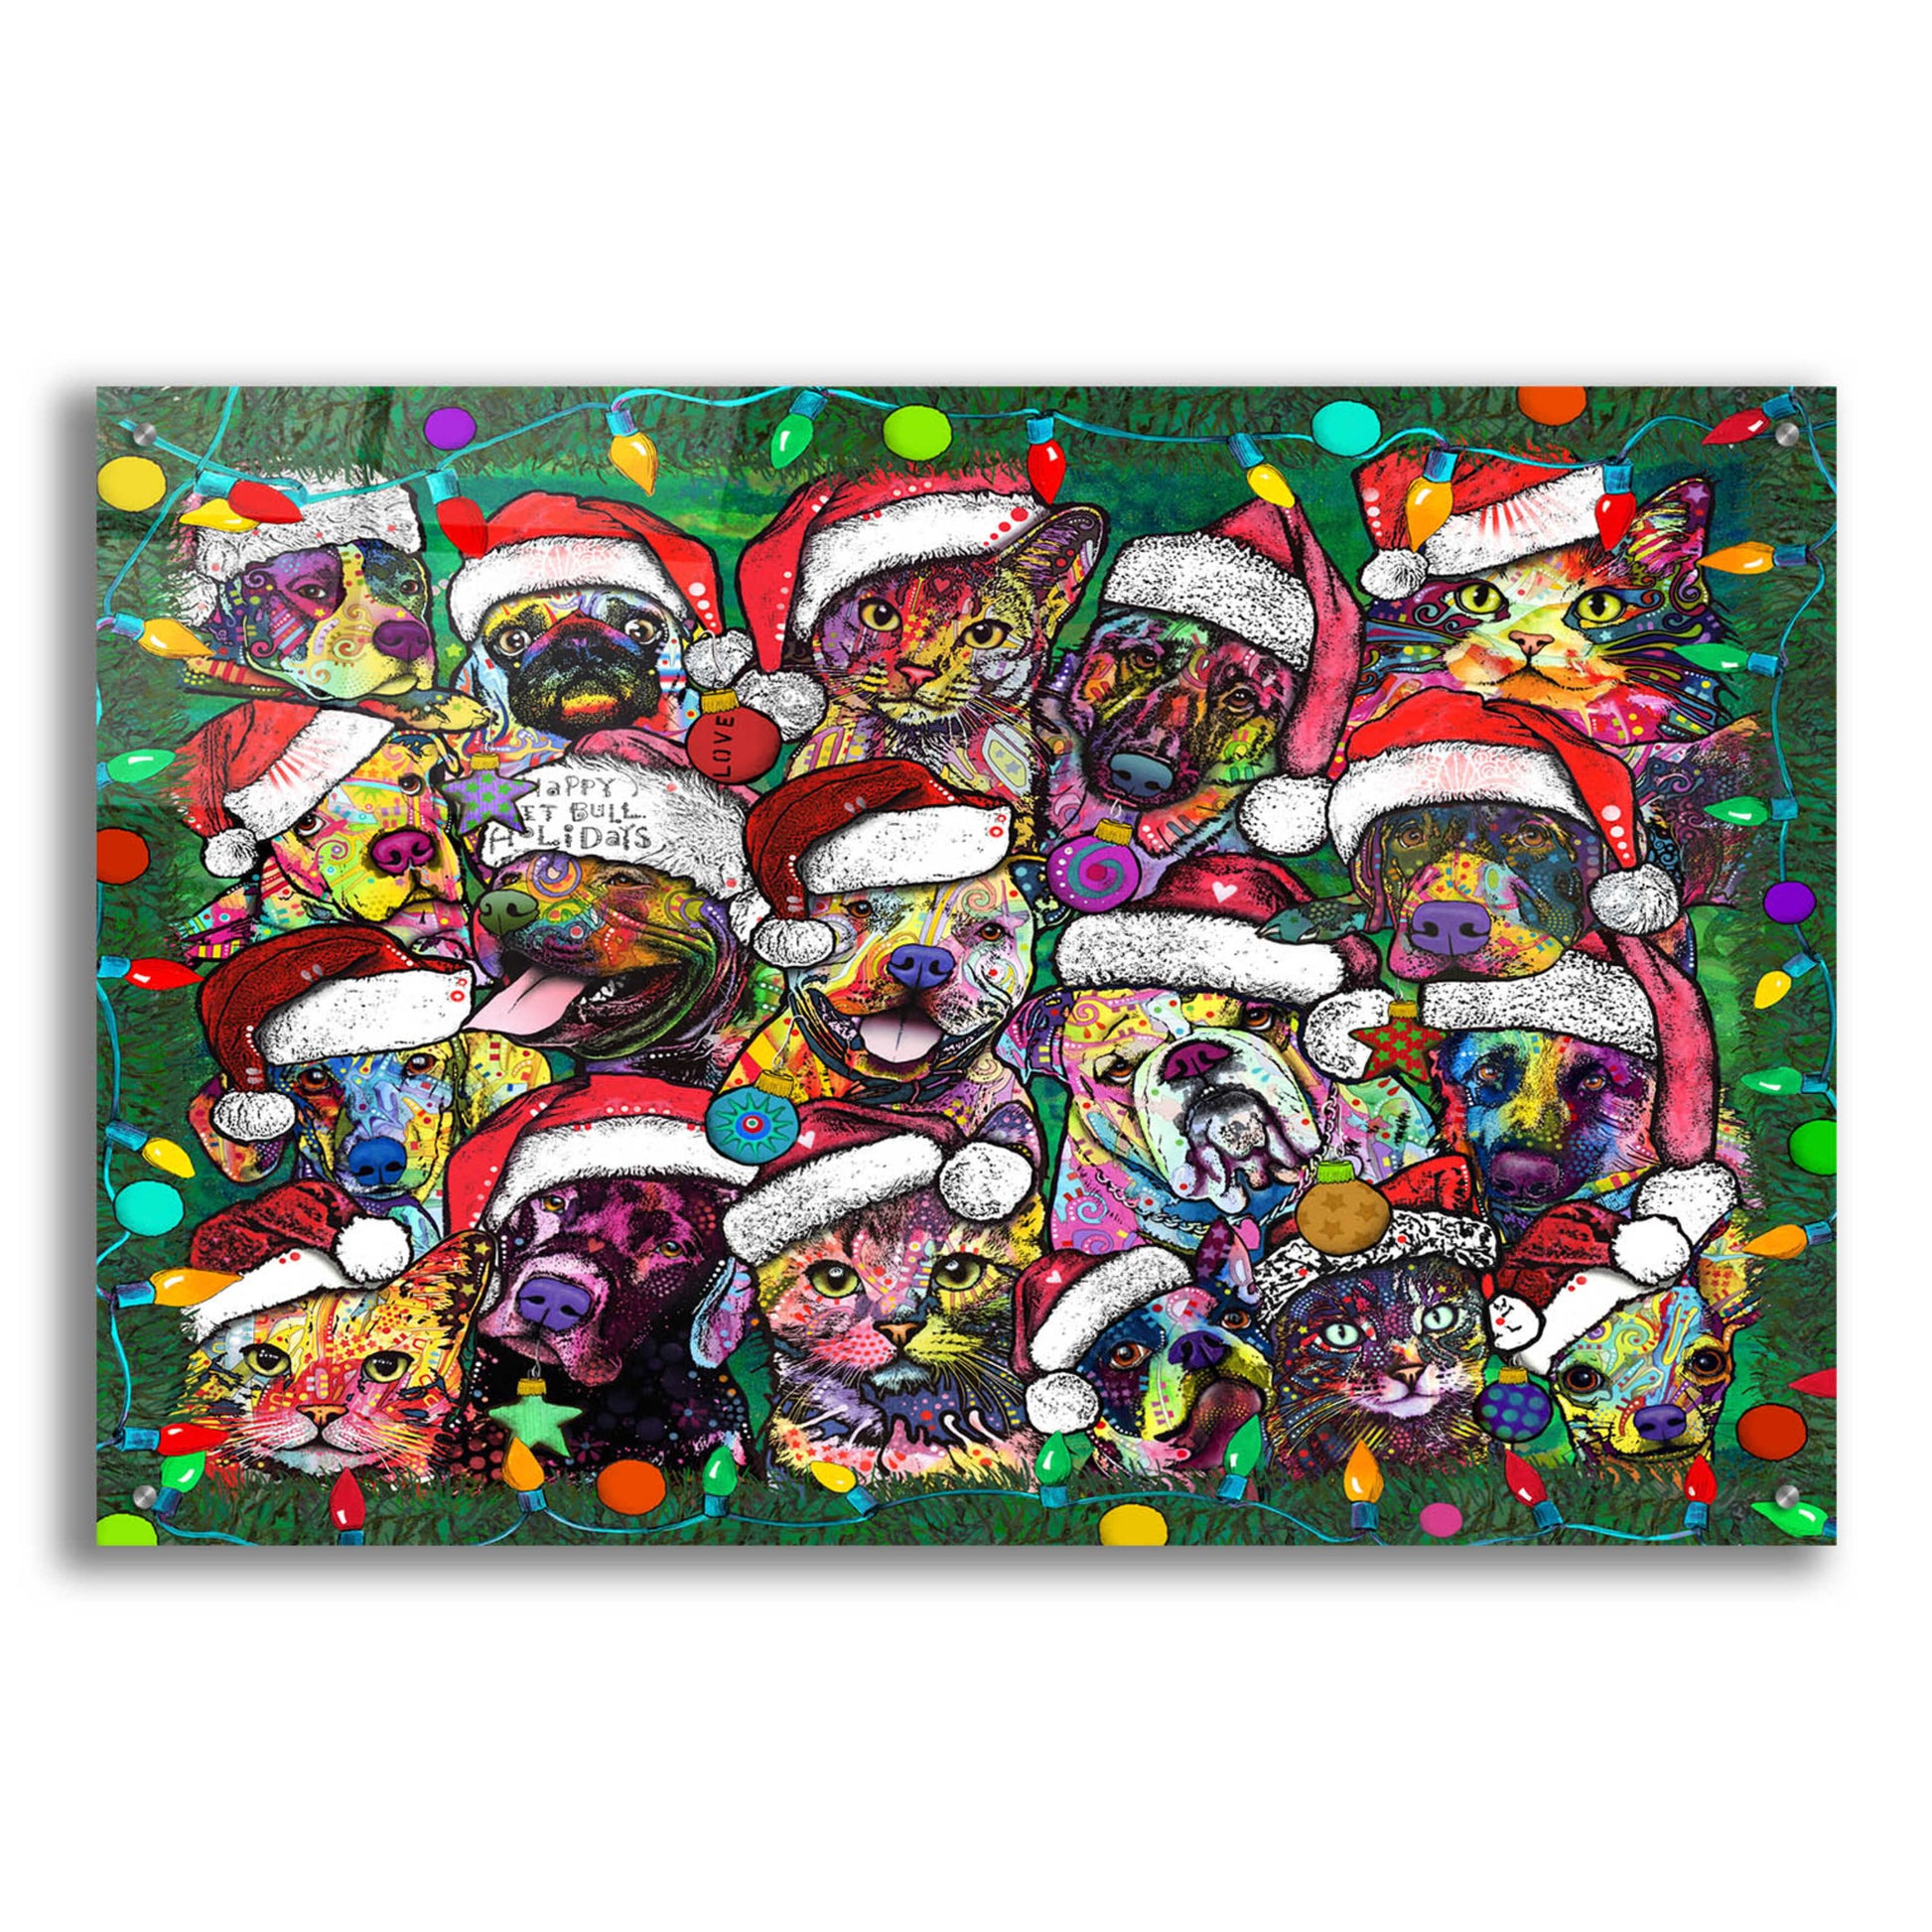 Epic Art 'Christmas Collage' by Dean Russo, Acrylic Glass Wall Art,36x24